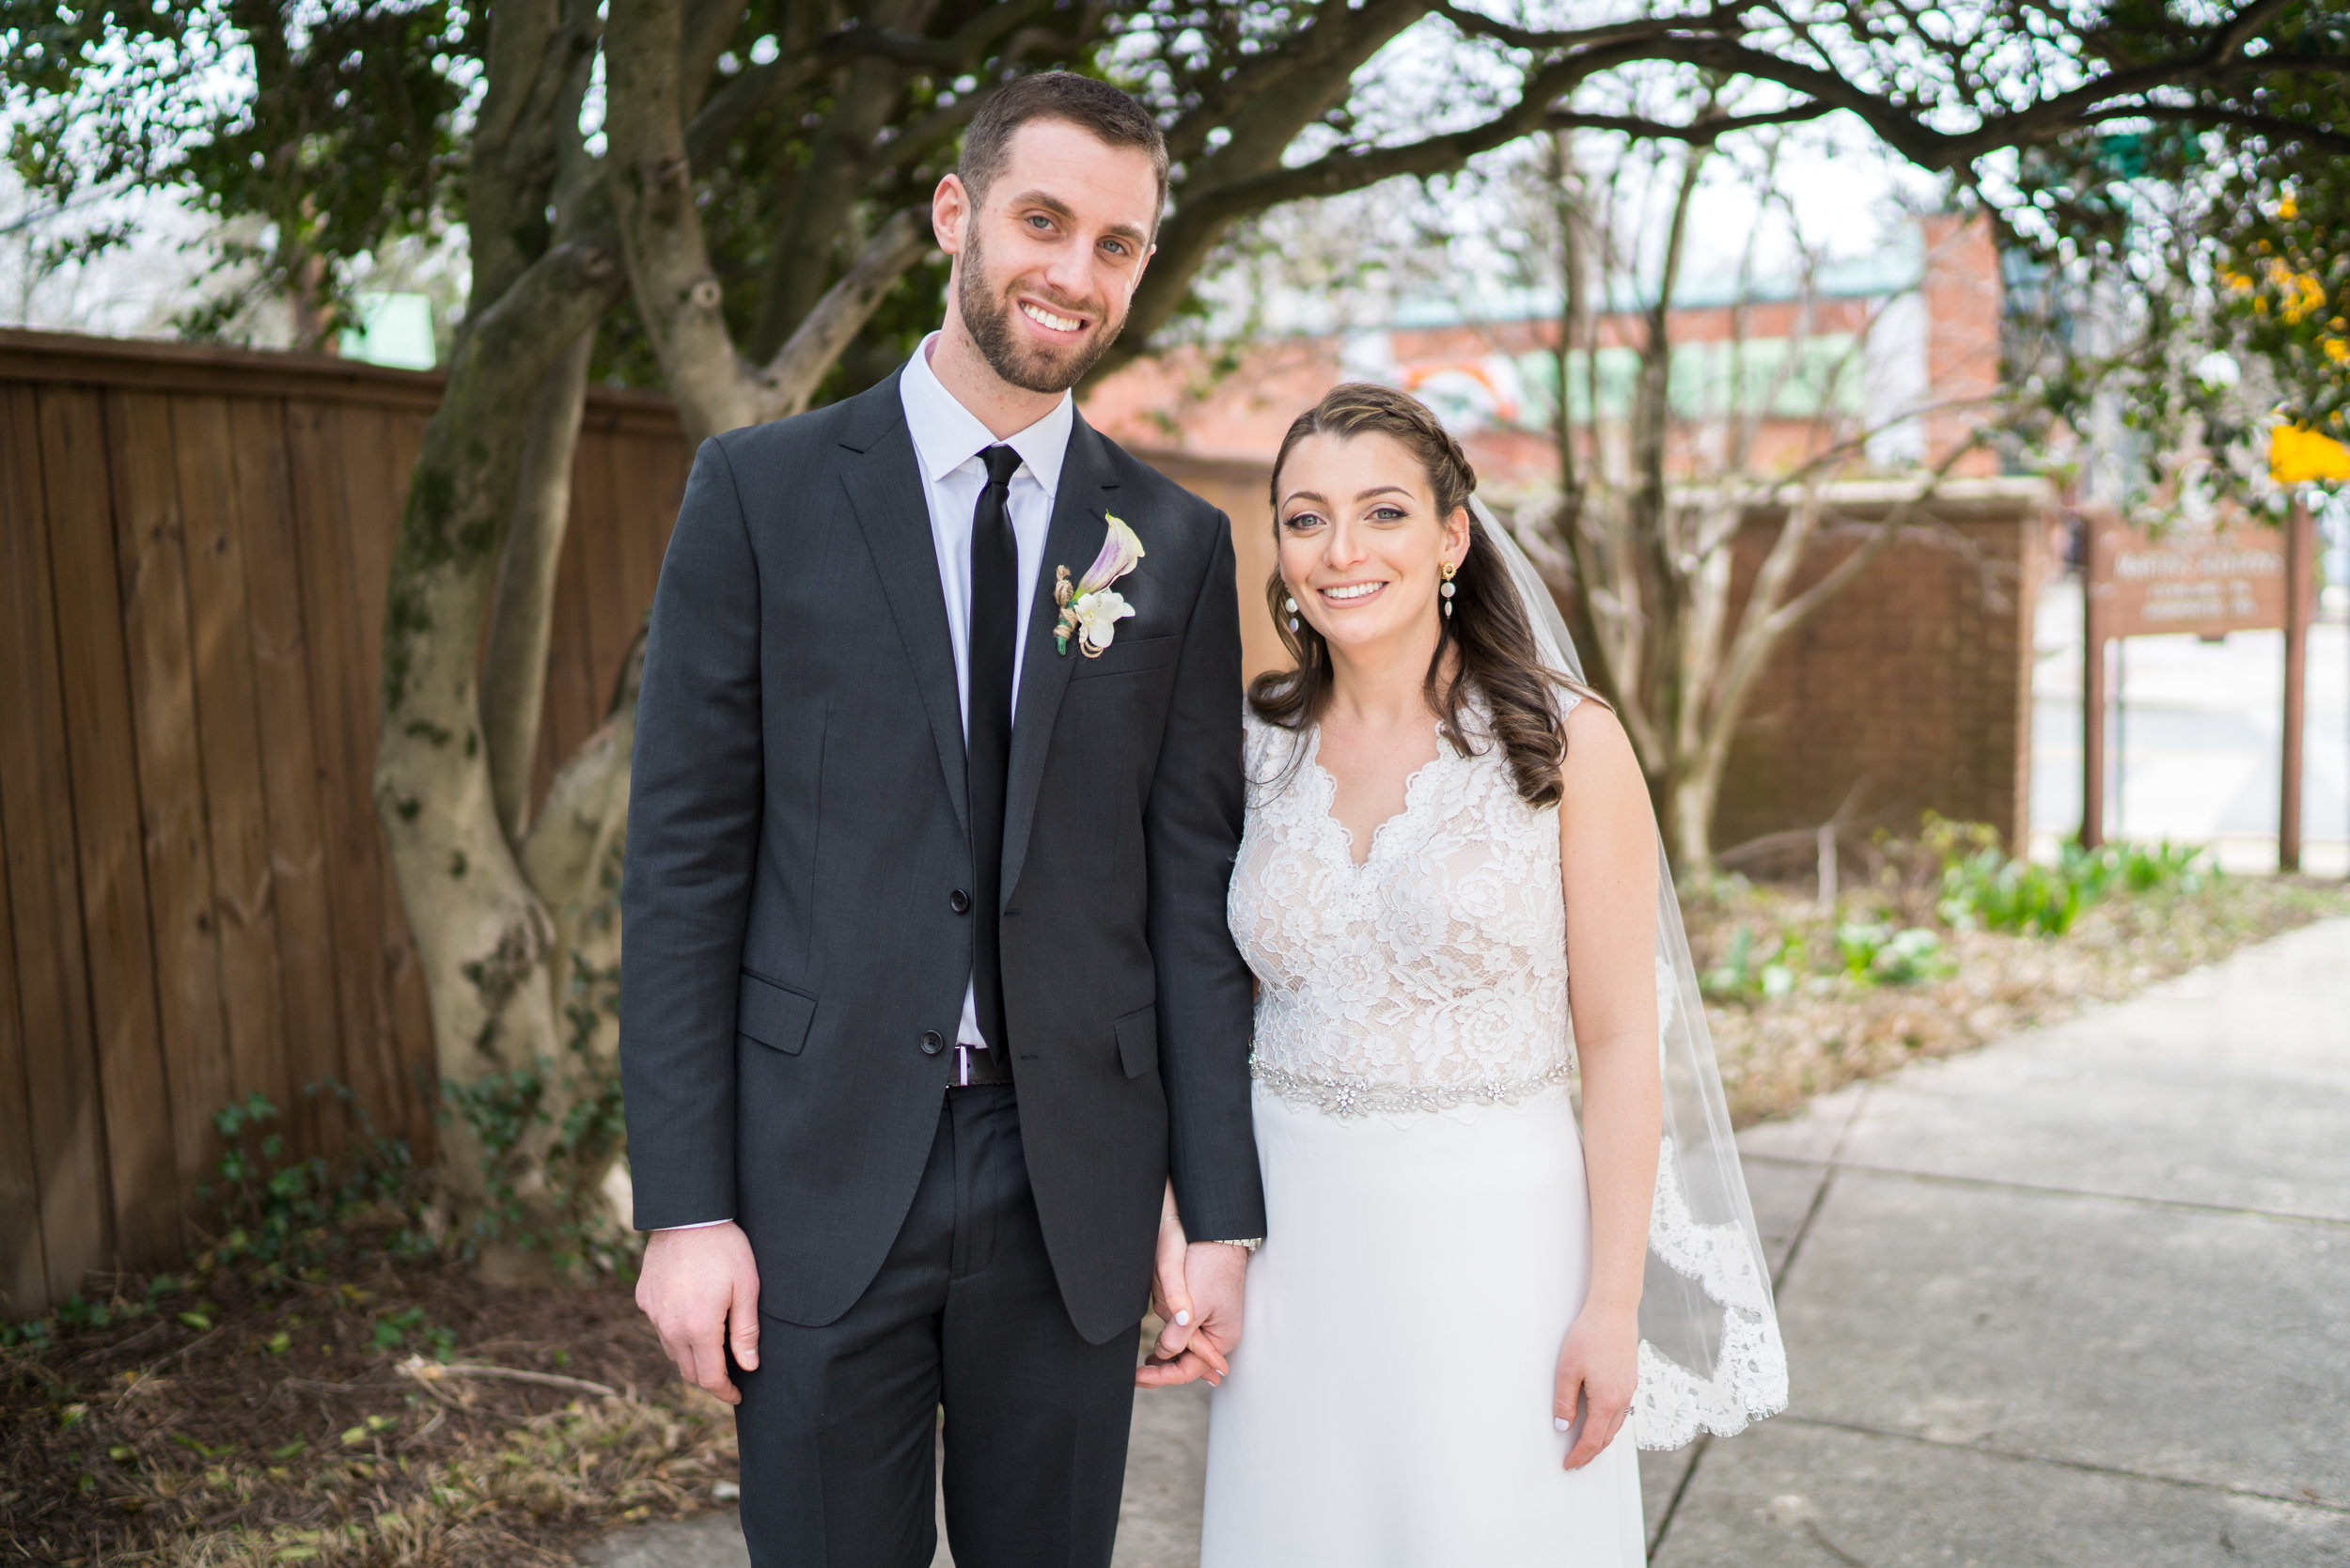 Bride and groom portraits in Chevy Chase Maryland wedding